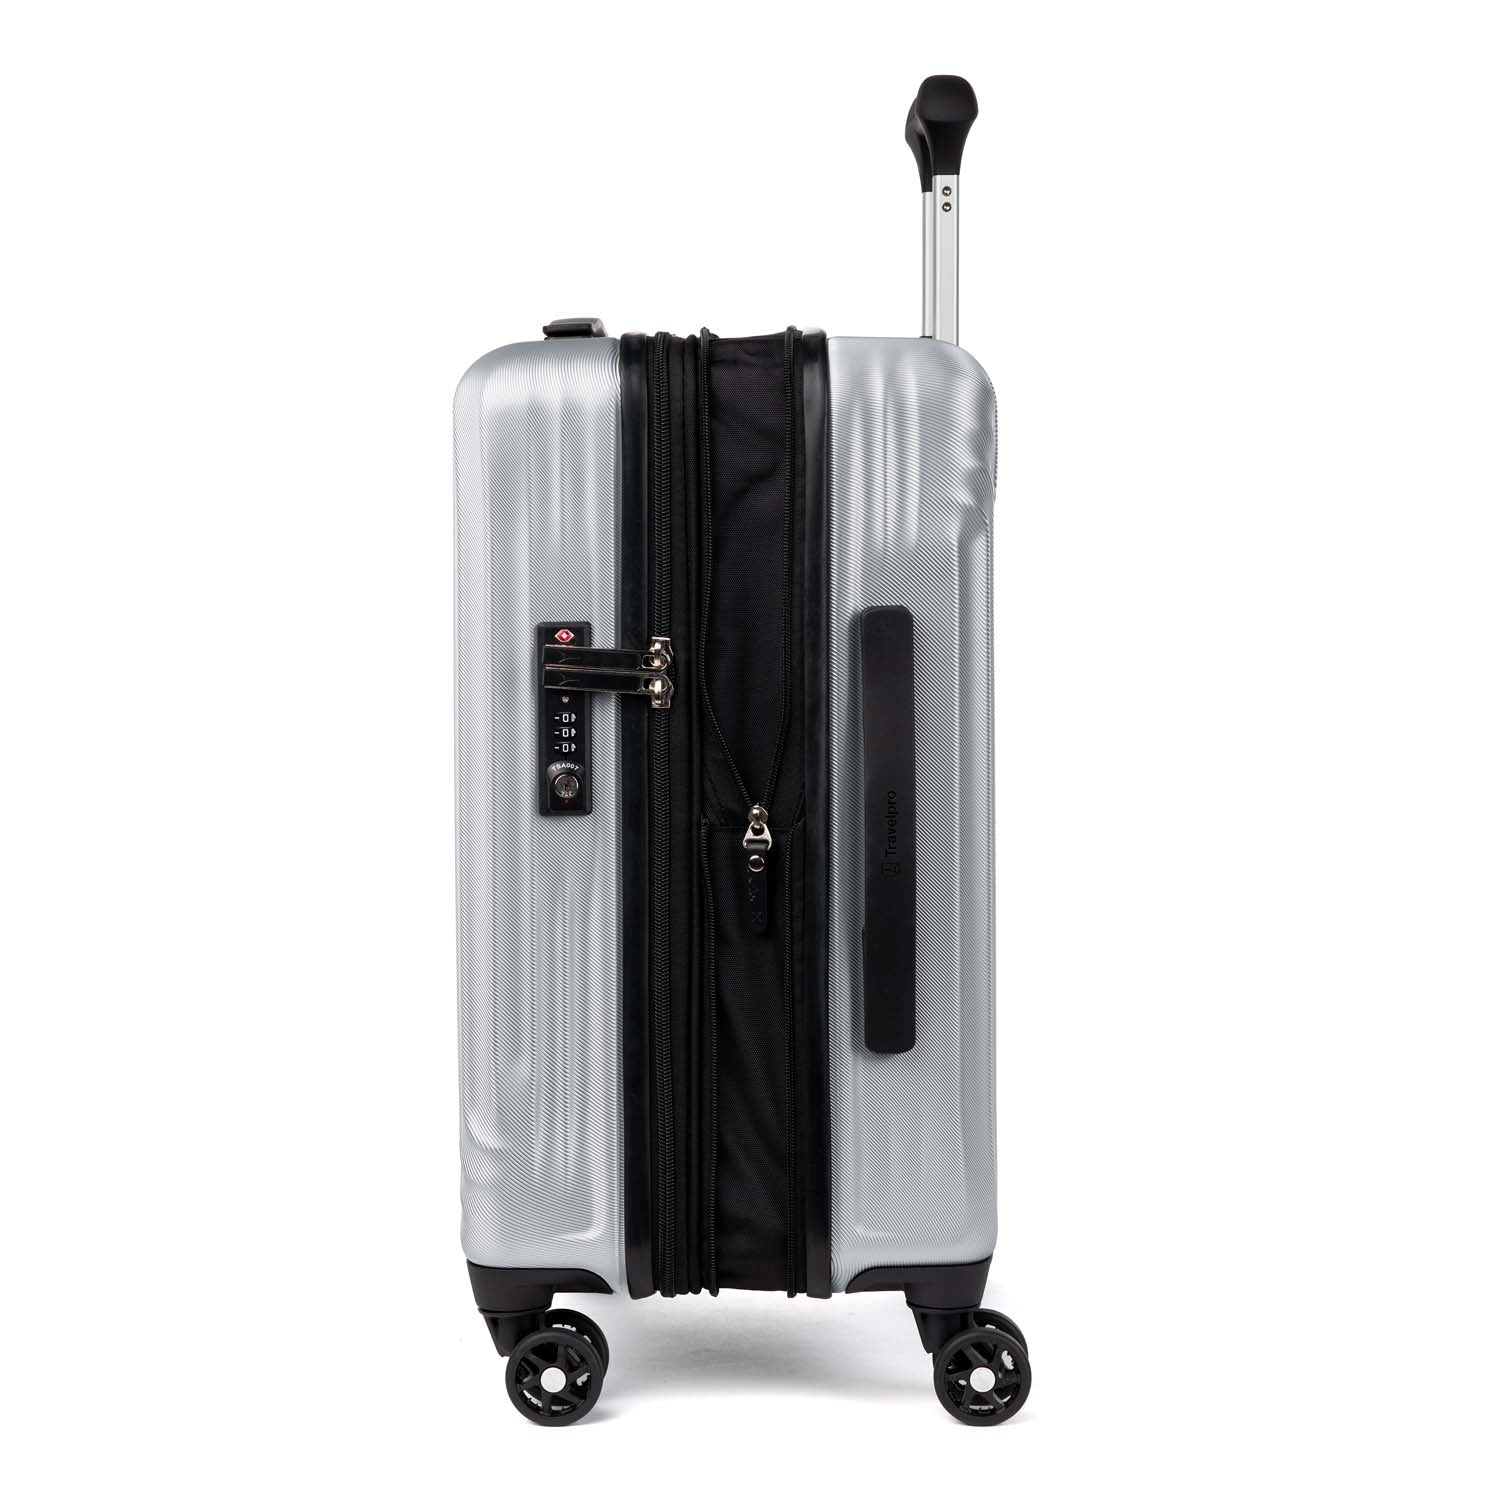 Travelpro Maxlite Air Compact Carry-On Expandable Hardside Spinner Luggage